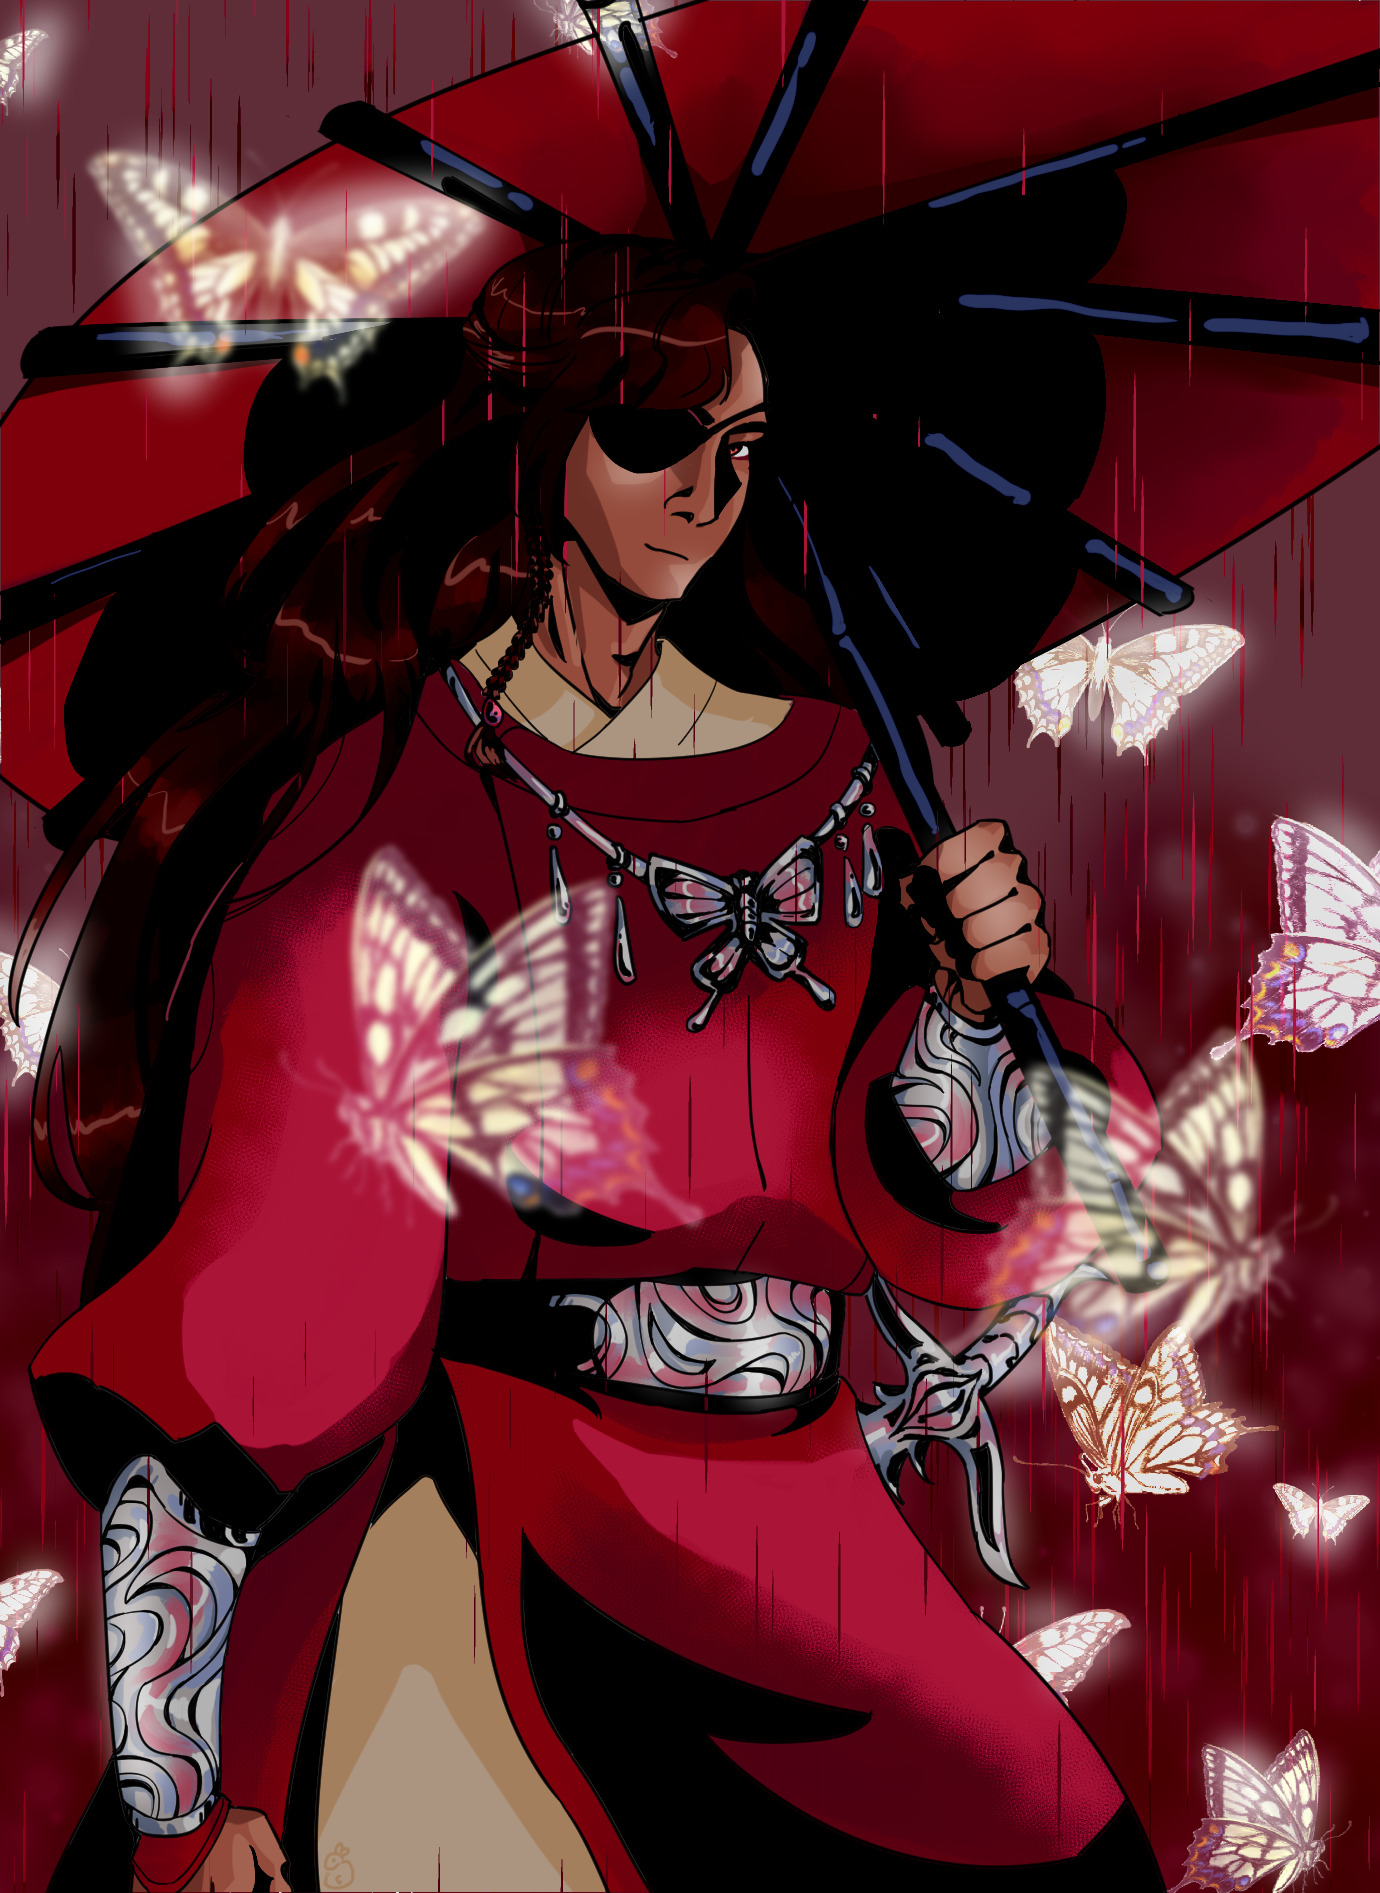 A fully coloured digital drawing of Hua Cheng from Heaven Official's Blessing (Tian Guan Ci Fu).